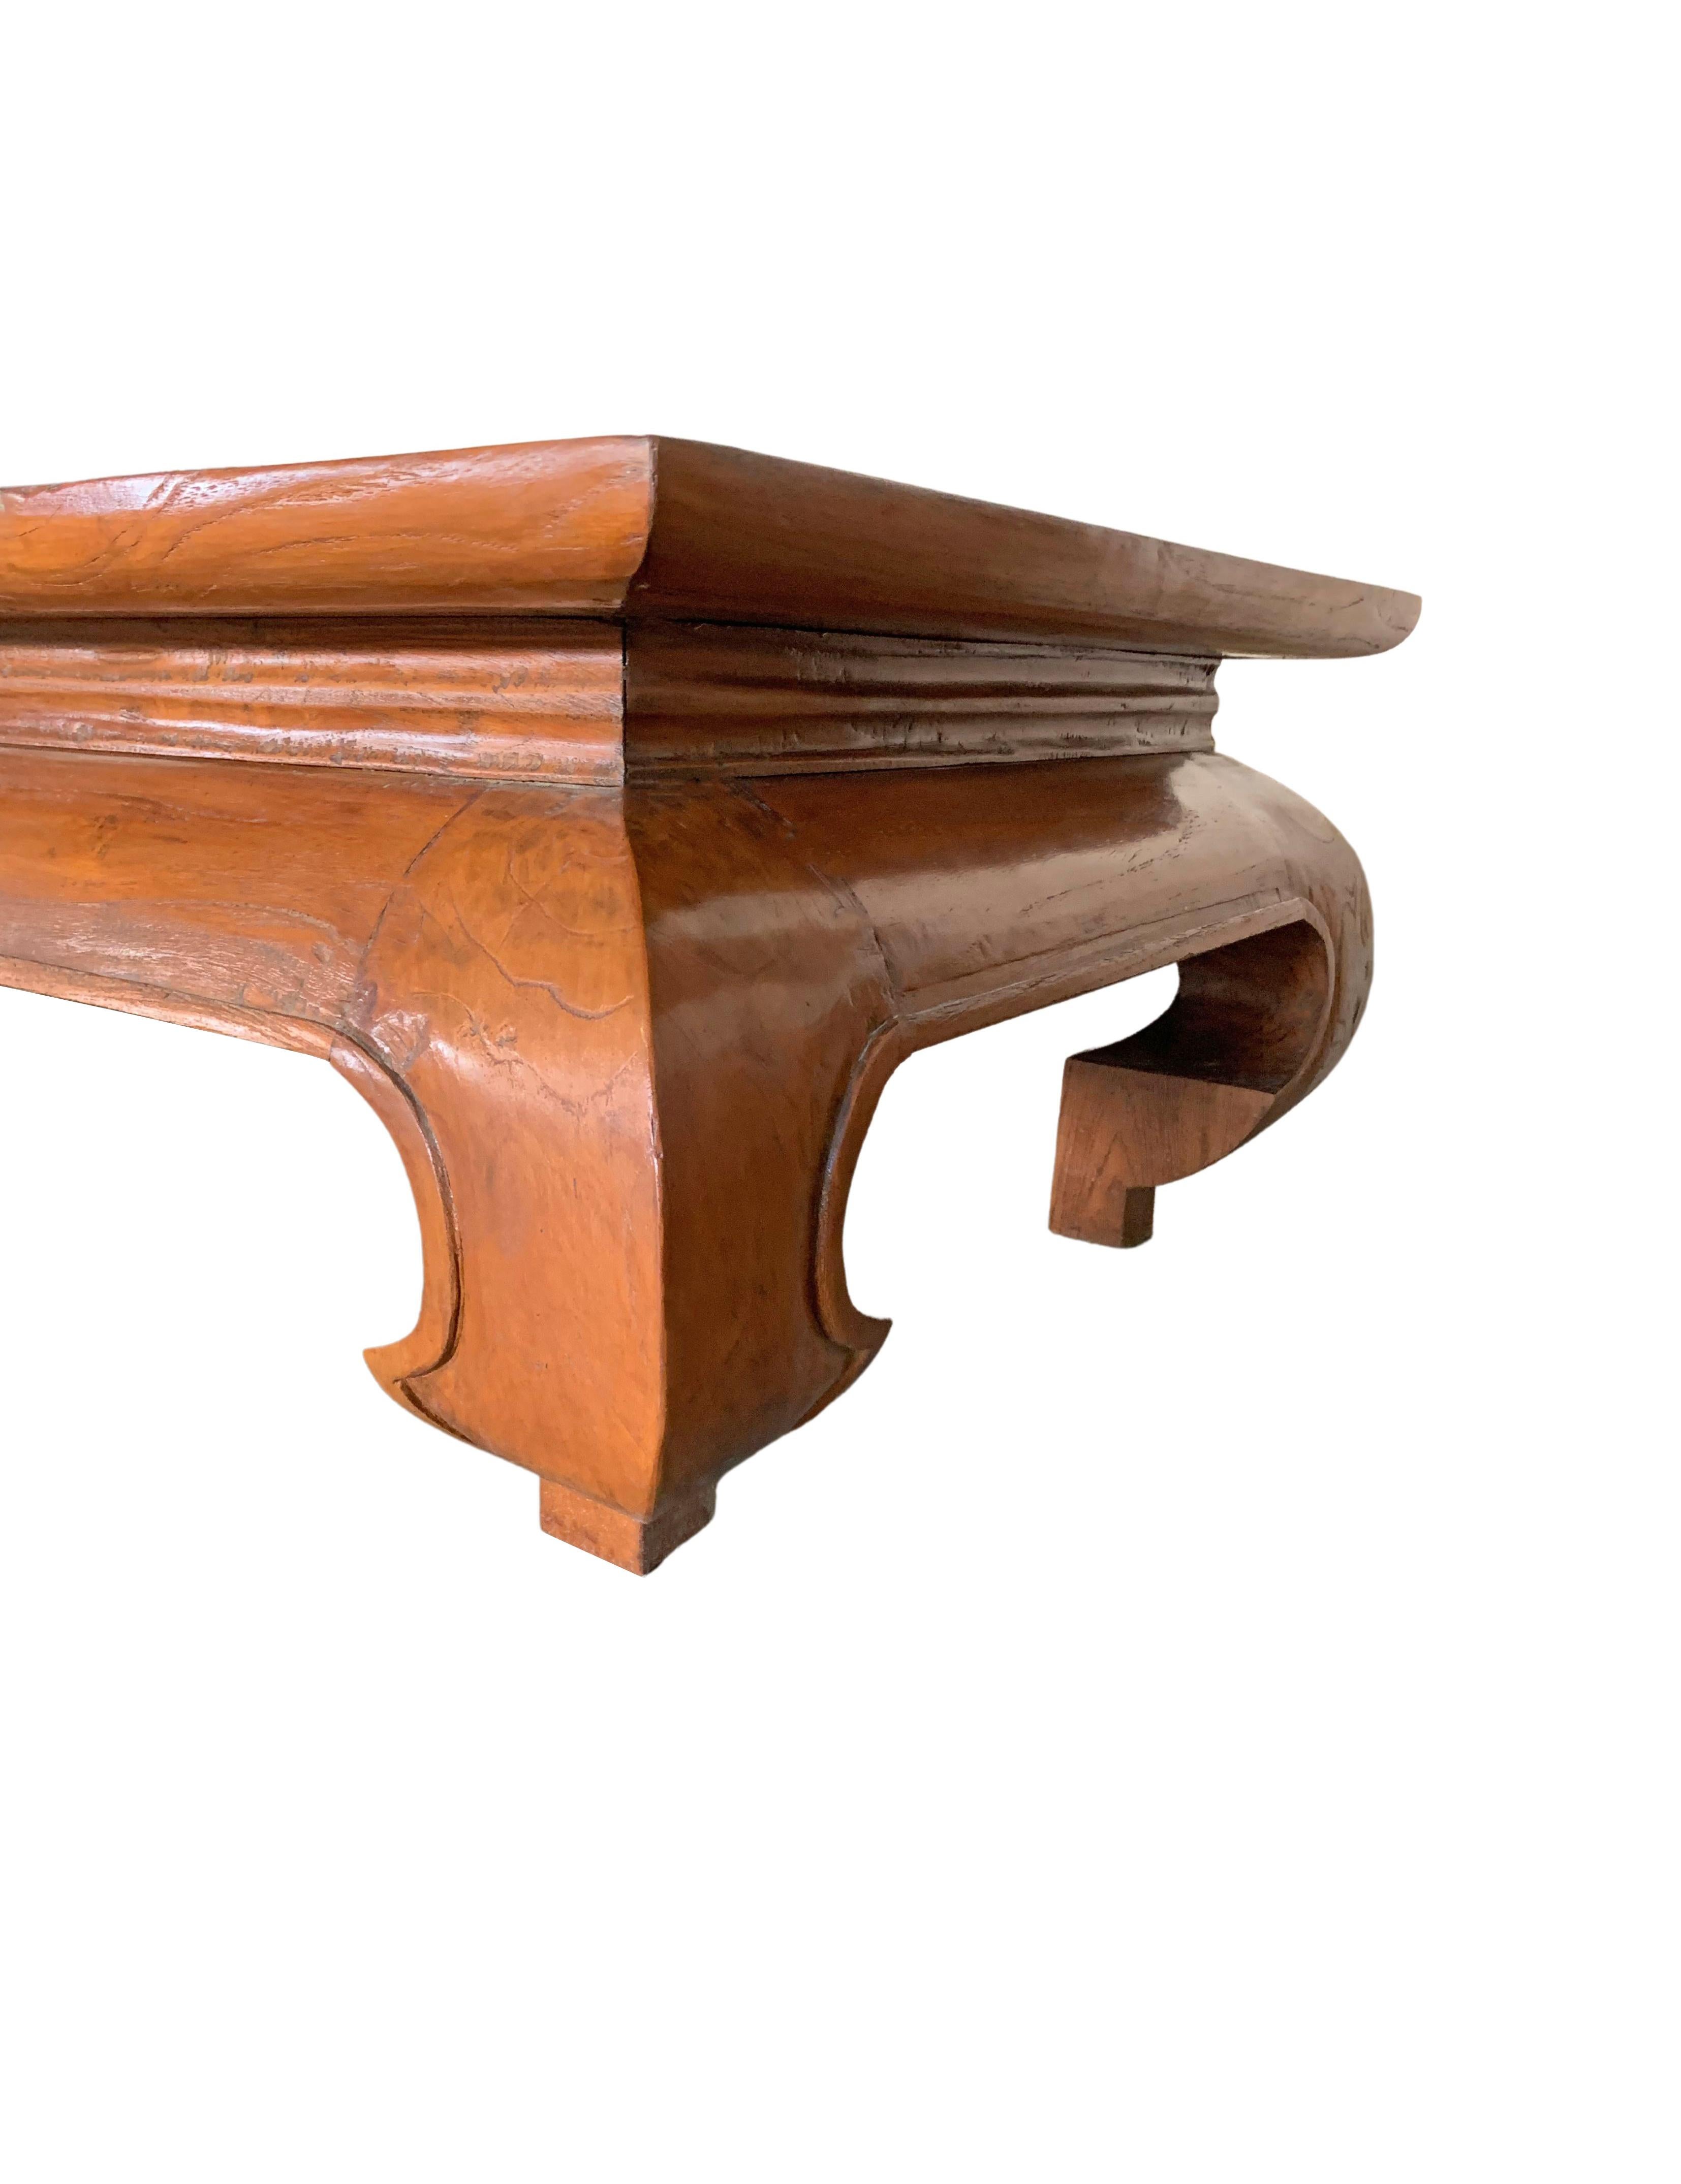 Indonesian Teak Wood Low Table with Curved Legs and Subtle Carved Detailing